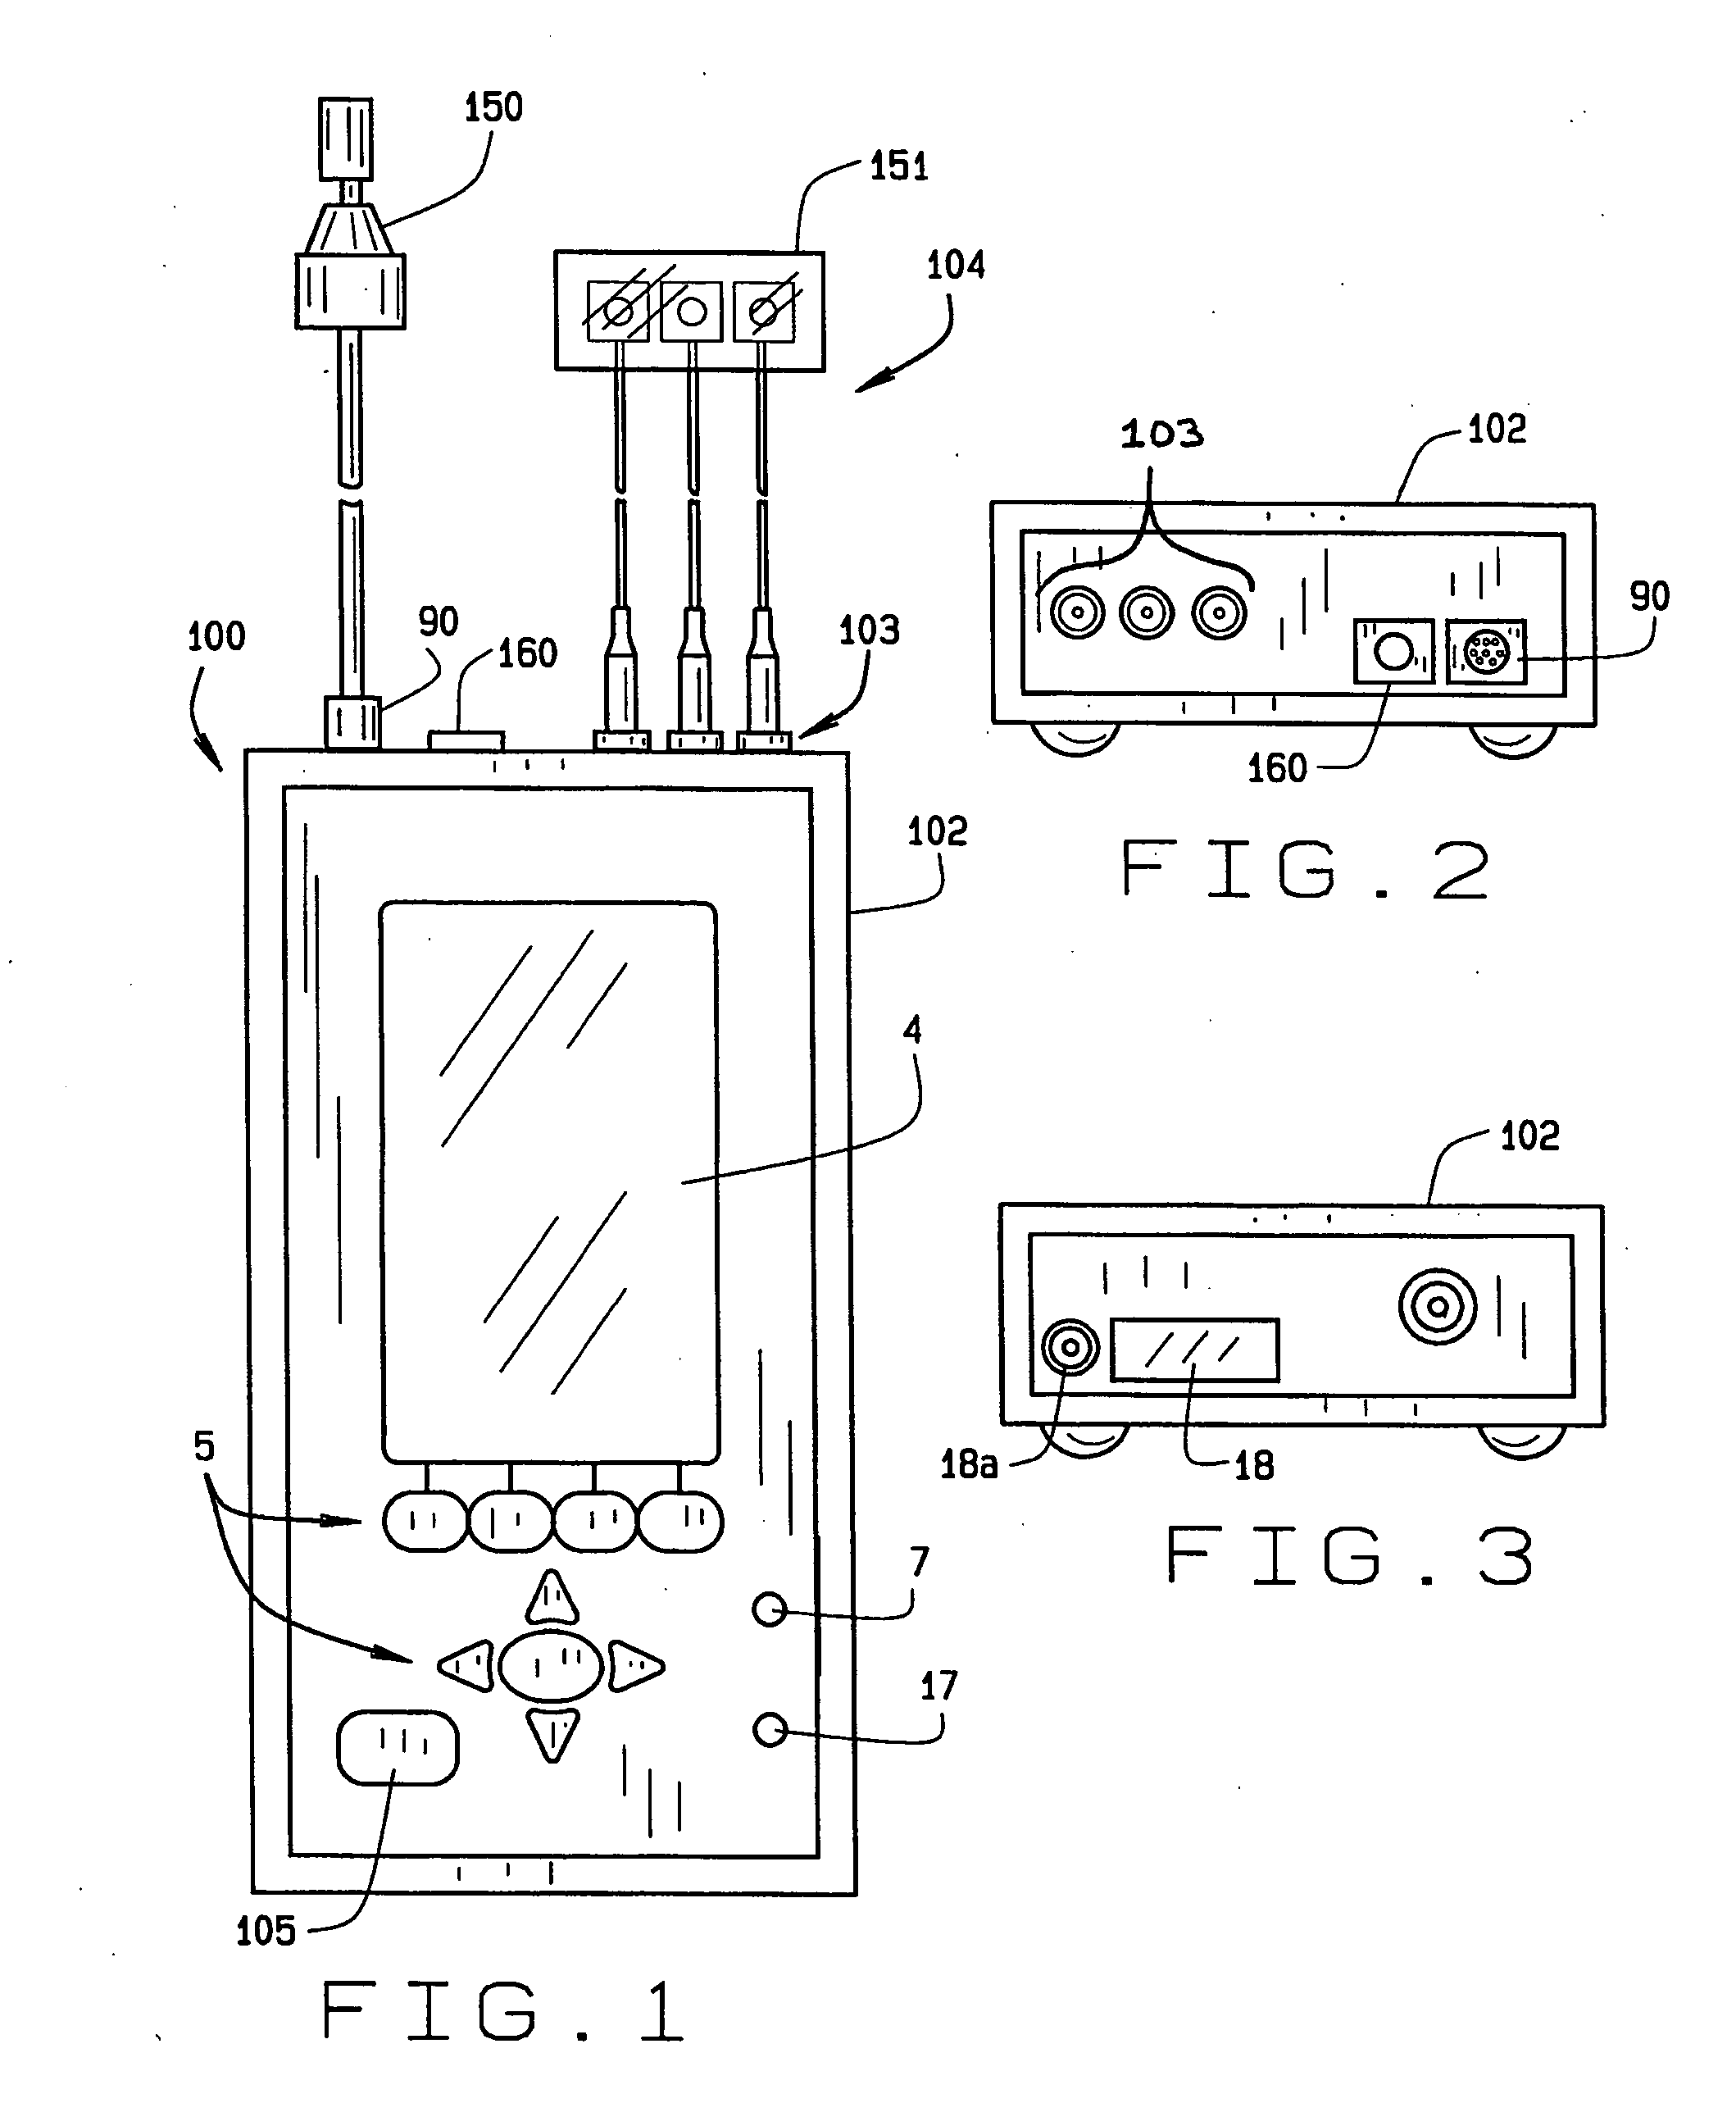 Handheld audiometric device and method for hearing testing